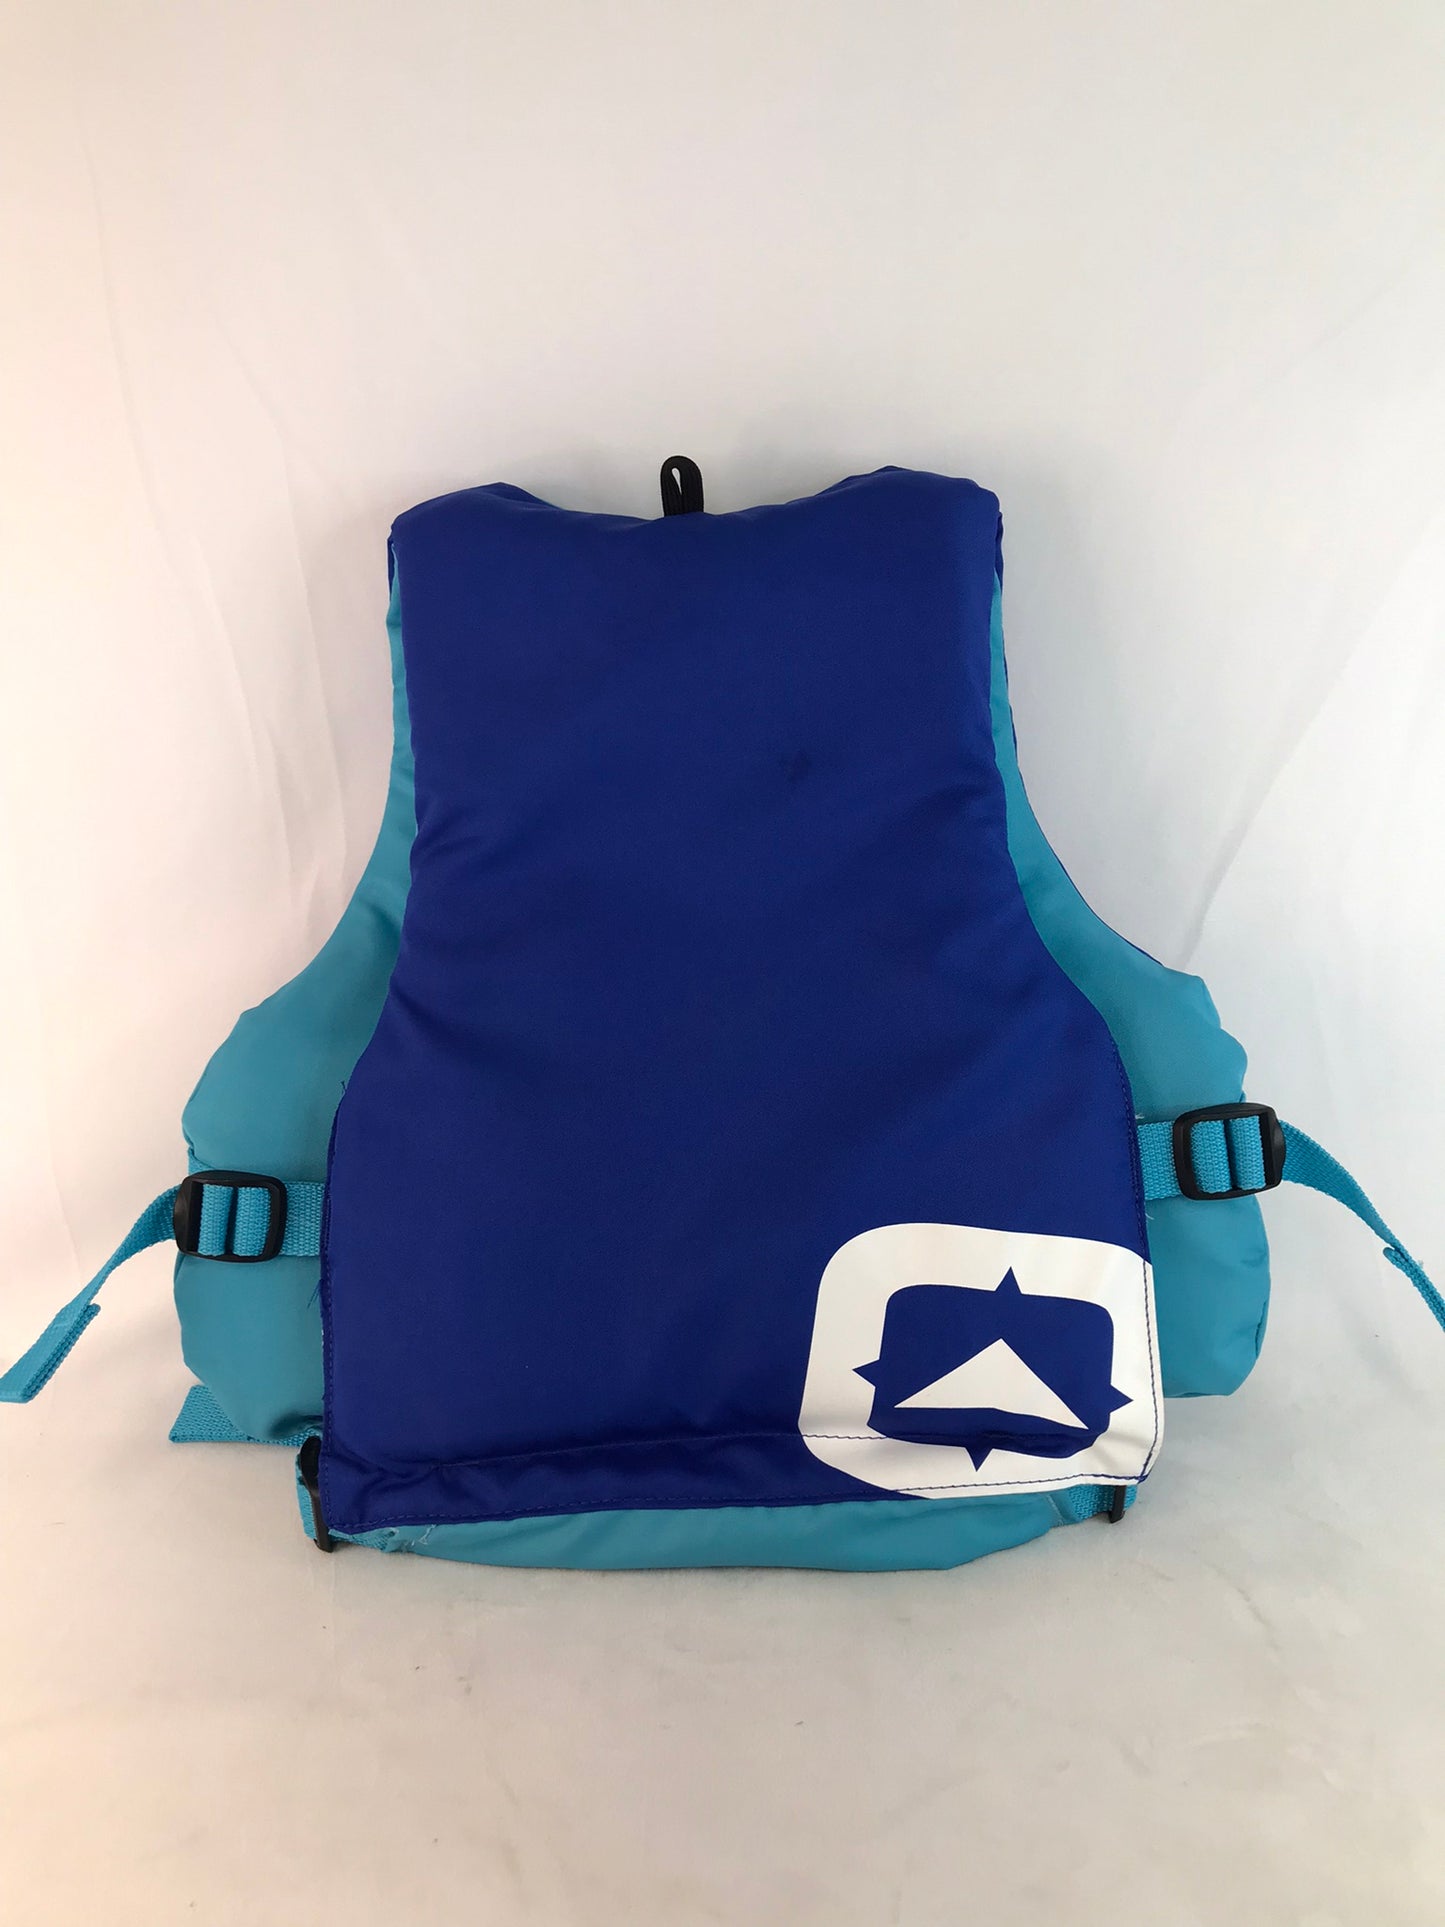 Life Jacket Child Size 55-88 Lb Outbound Youth Kayak Canoe Paddle Marine Blue and Blue As New Excellent